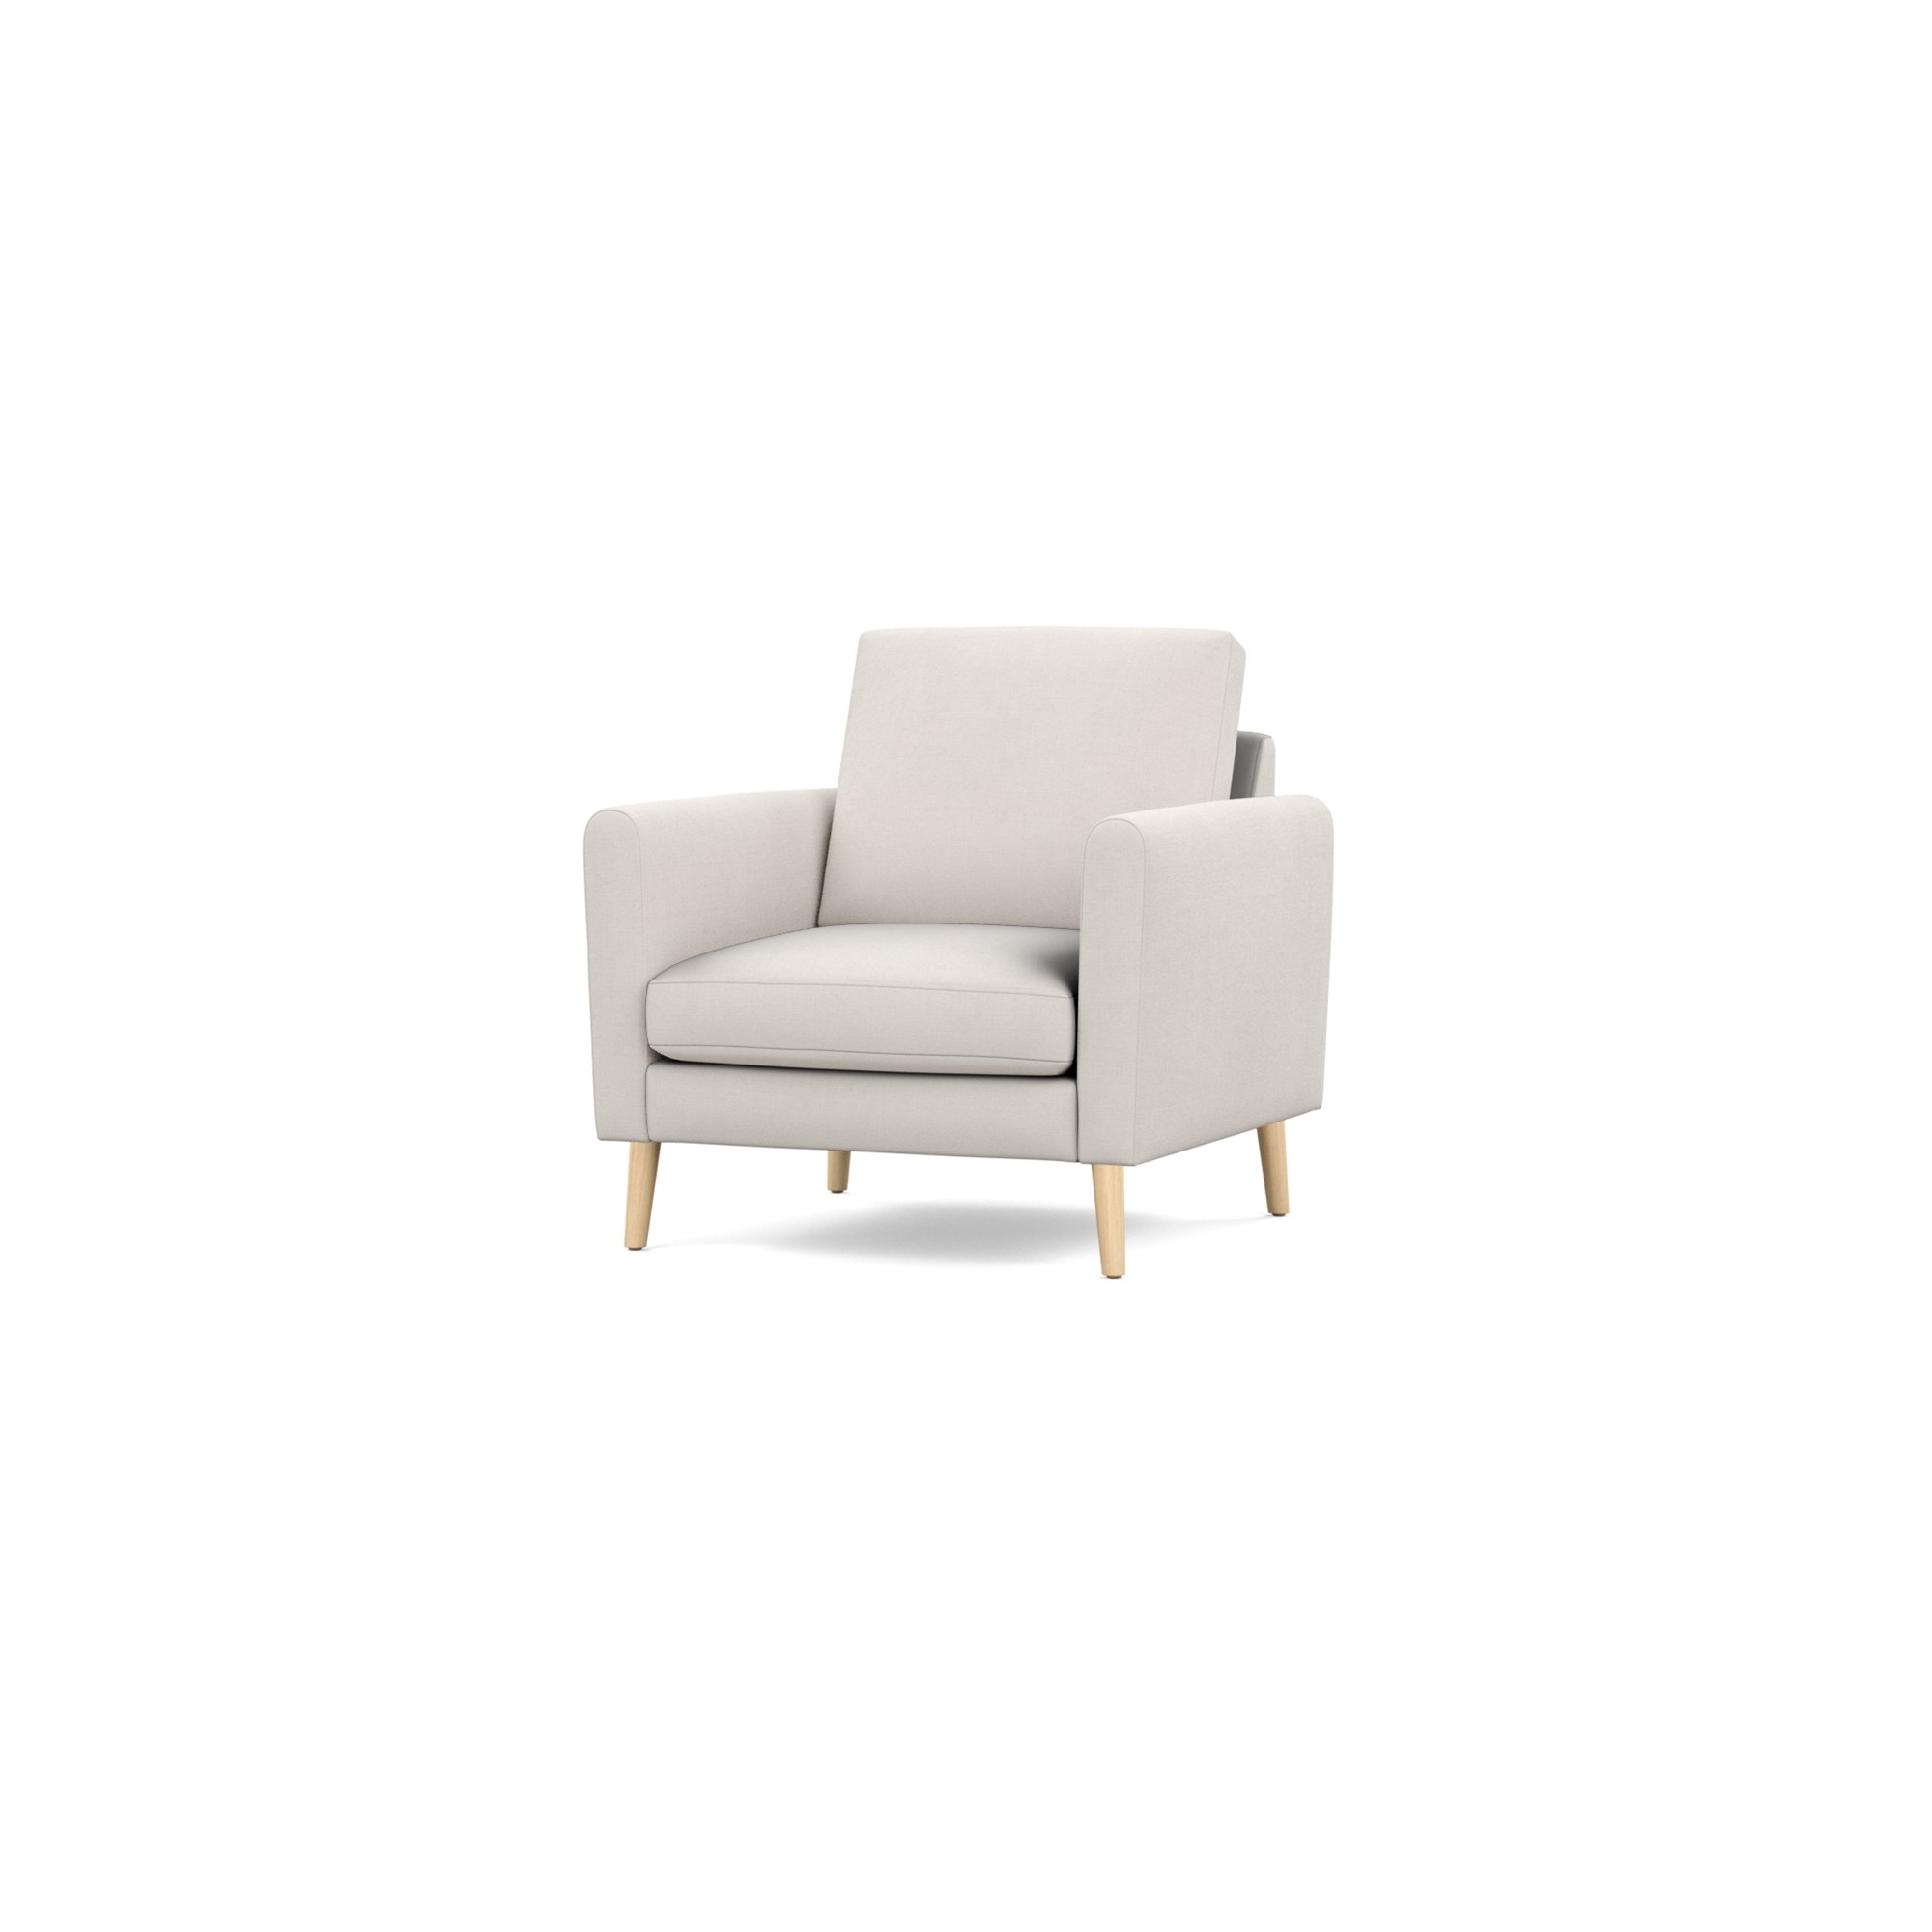 Burrow Ivory White Armchair, High Arms, Light Wood Legs | Nomad Collection - Image 0